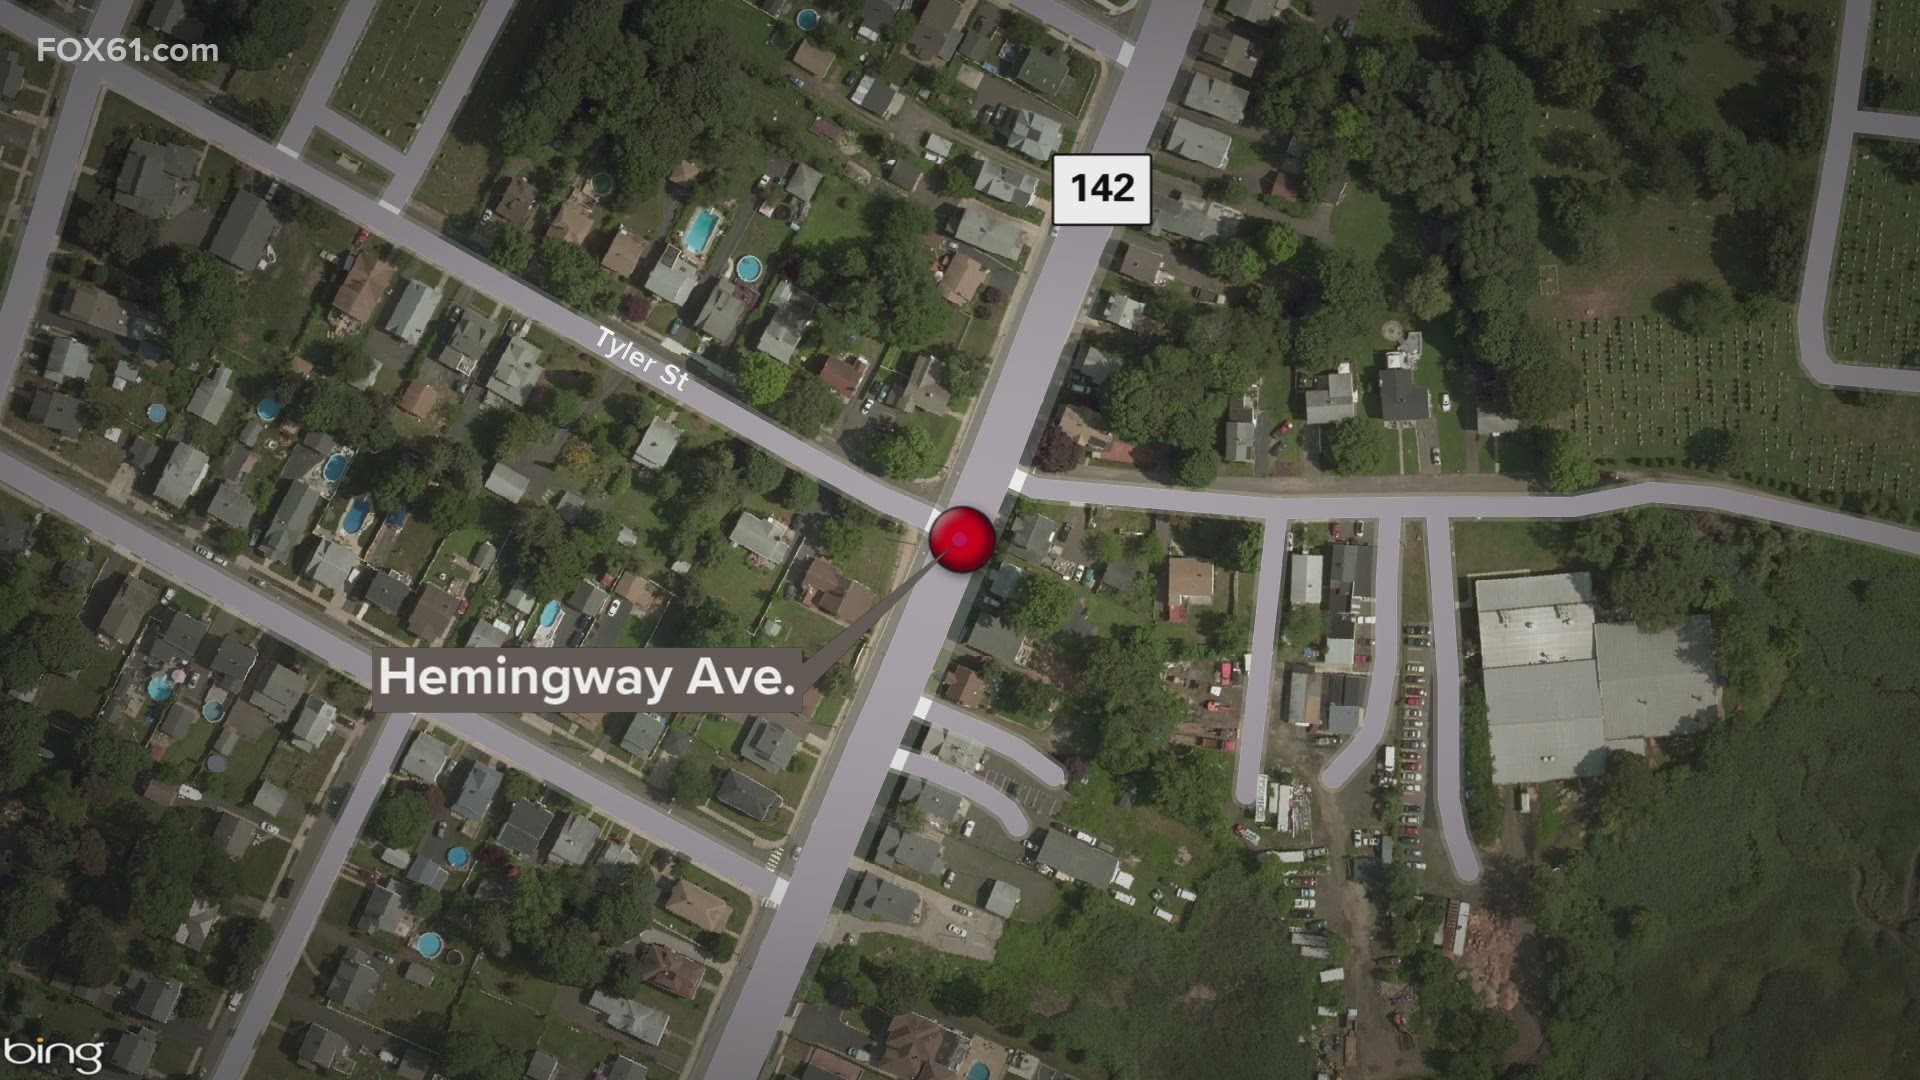 On July 18, a 30-year-old was struck in the area of Hemingway Avenue and Tyler Street. He was taken to a hospital where he later died of his injuries.